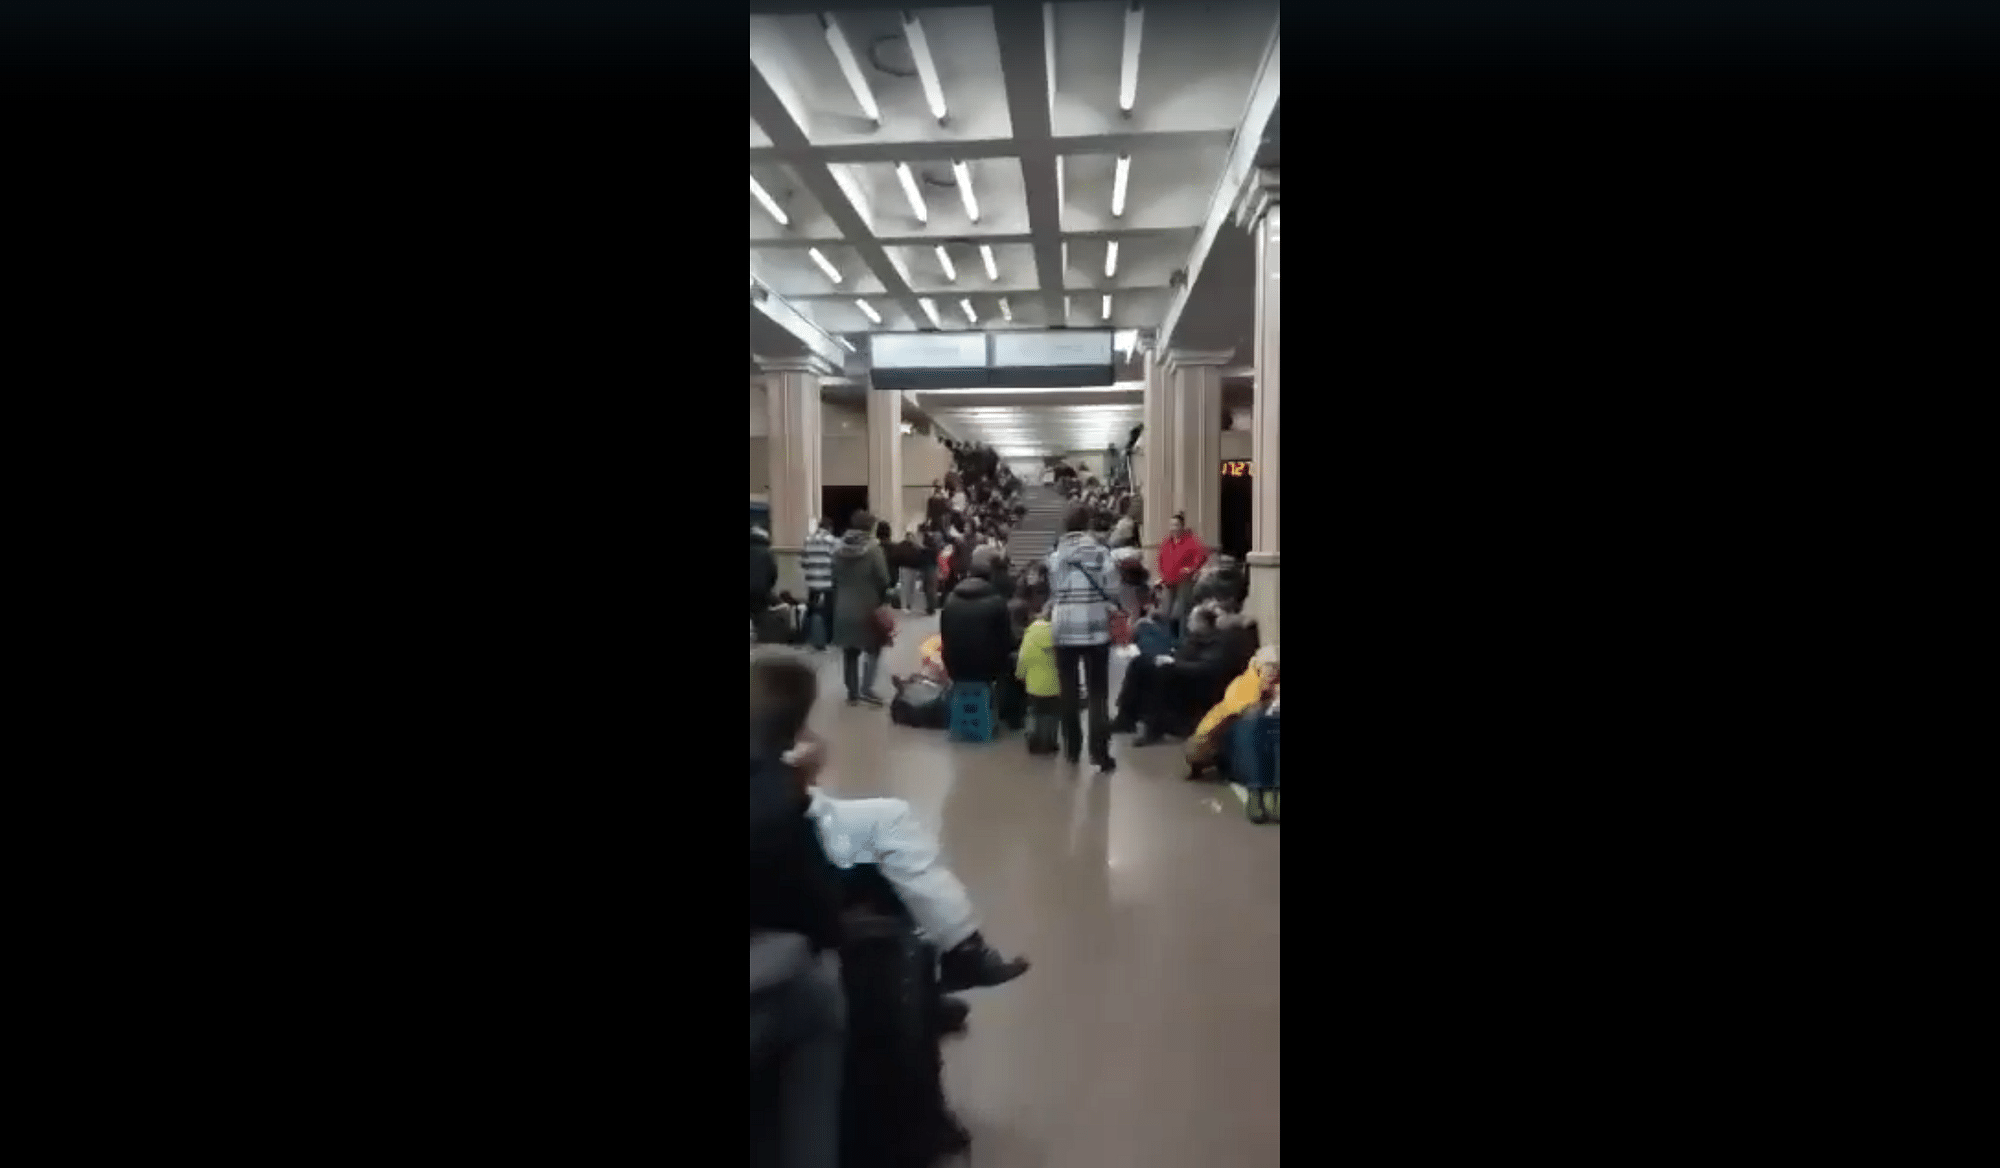 <div class="paragraphs"><p>In the aftermath of the closure of Ukrainian airspace, thousands of Indian students have been left stranded in the country, including fourth-year MBBS student, Jensi Singh, who had uploaded a video seeking help.</p><p><br></p></div>